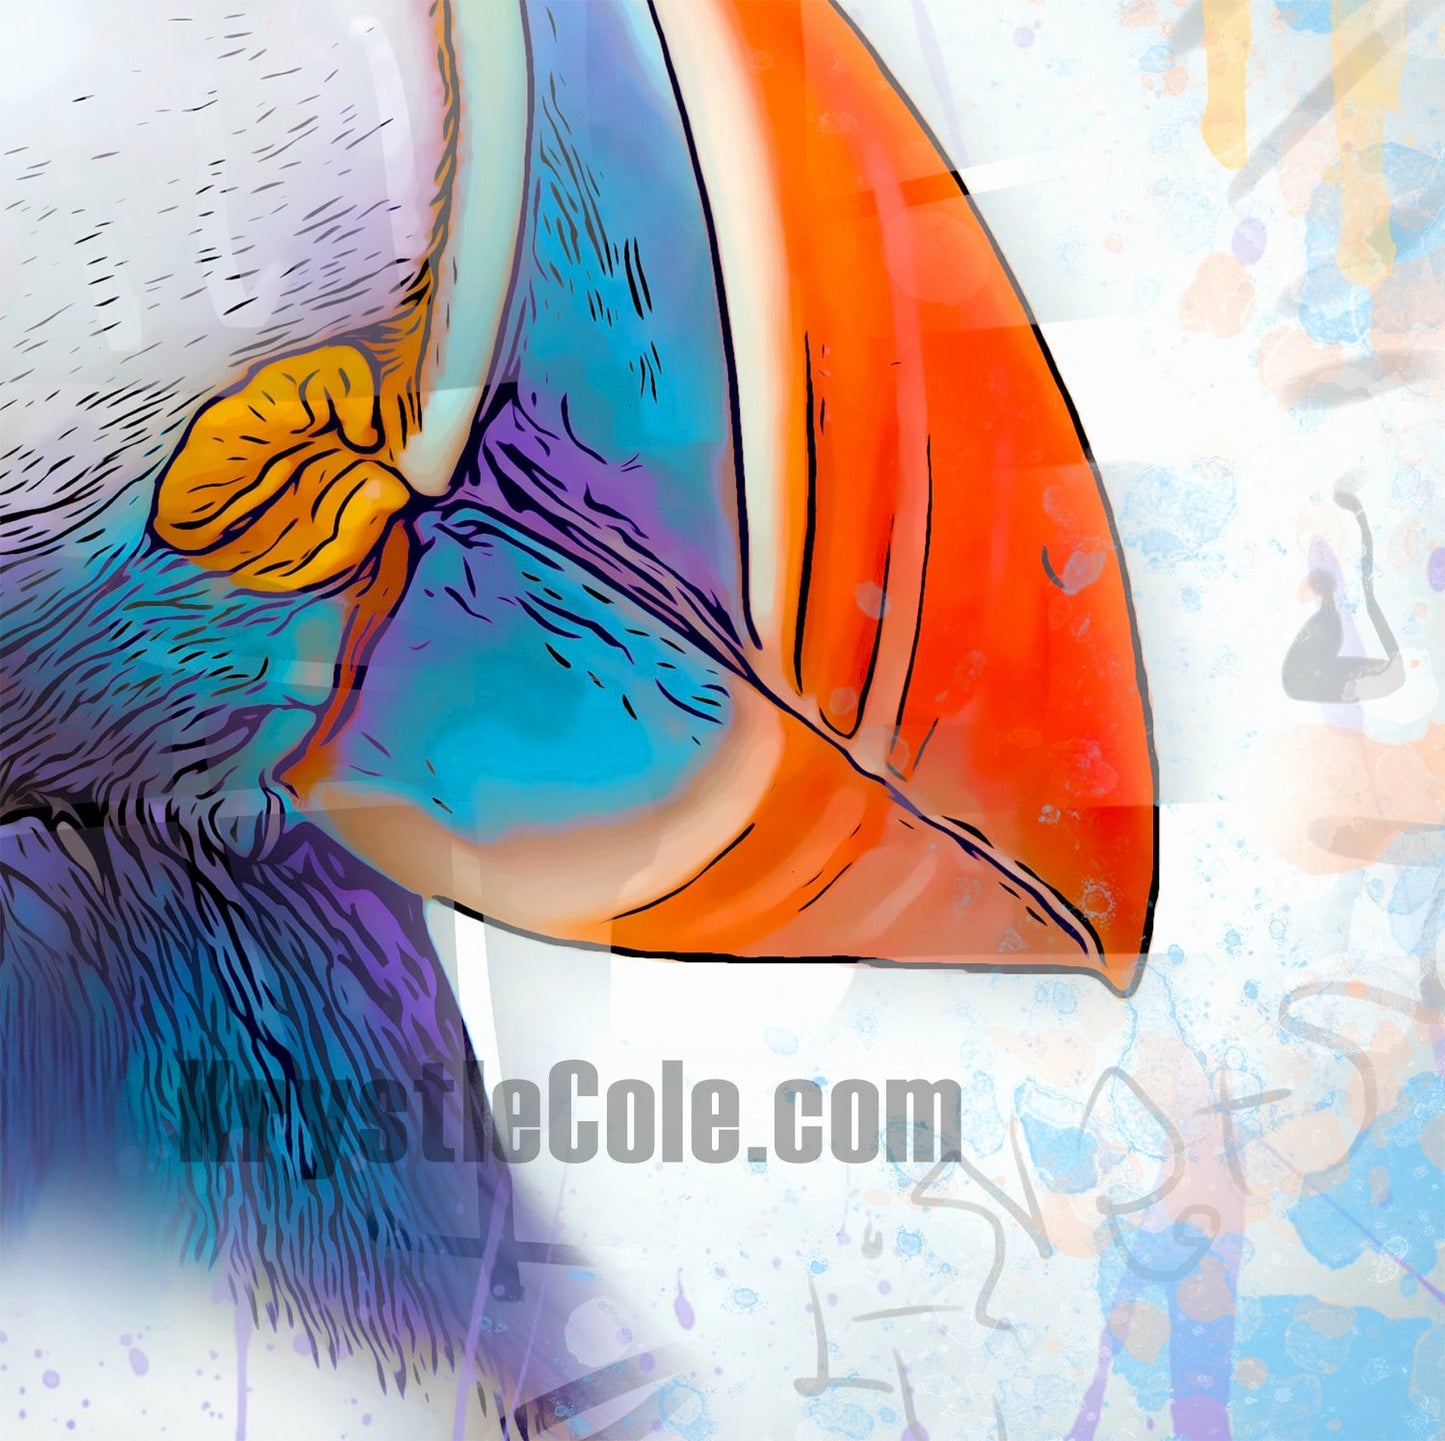 Puffin Art Print on CANVAS or PAPER - Colorful Puffin Painting by Krystle Cole